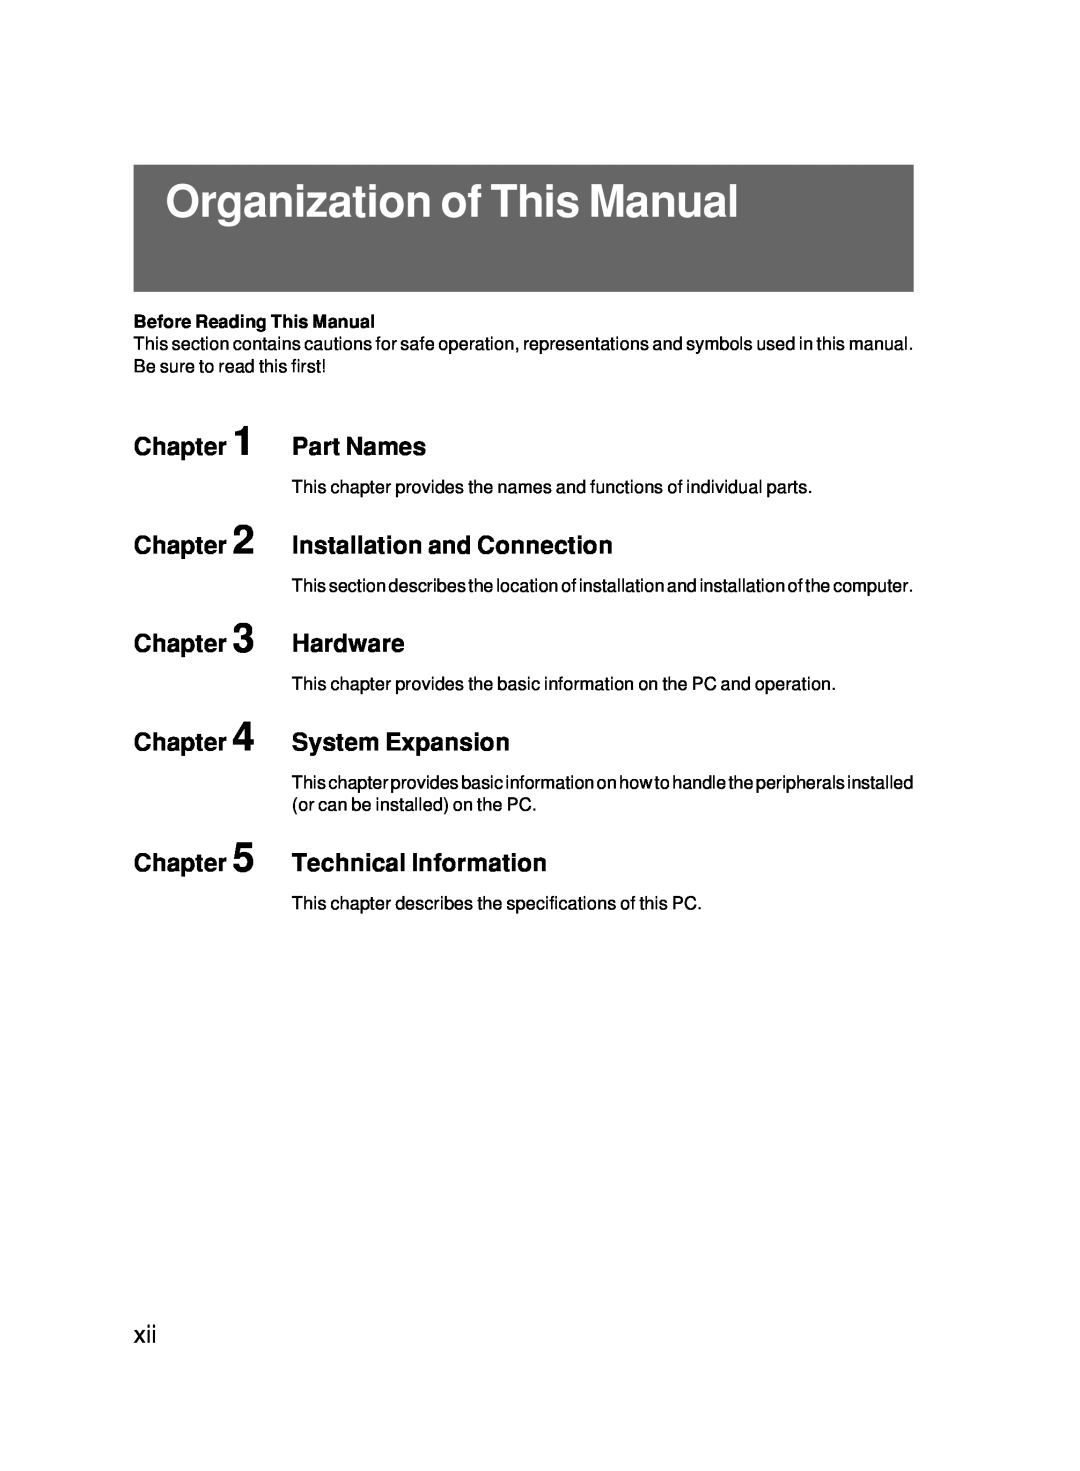 Fujitsu 5000 user manual Organization of This Manual, Part Names, Installation and Connection, Hardware, System Expansion 